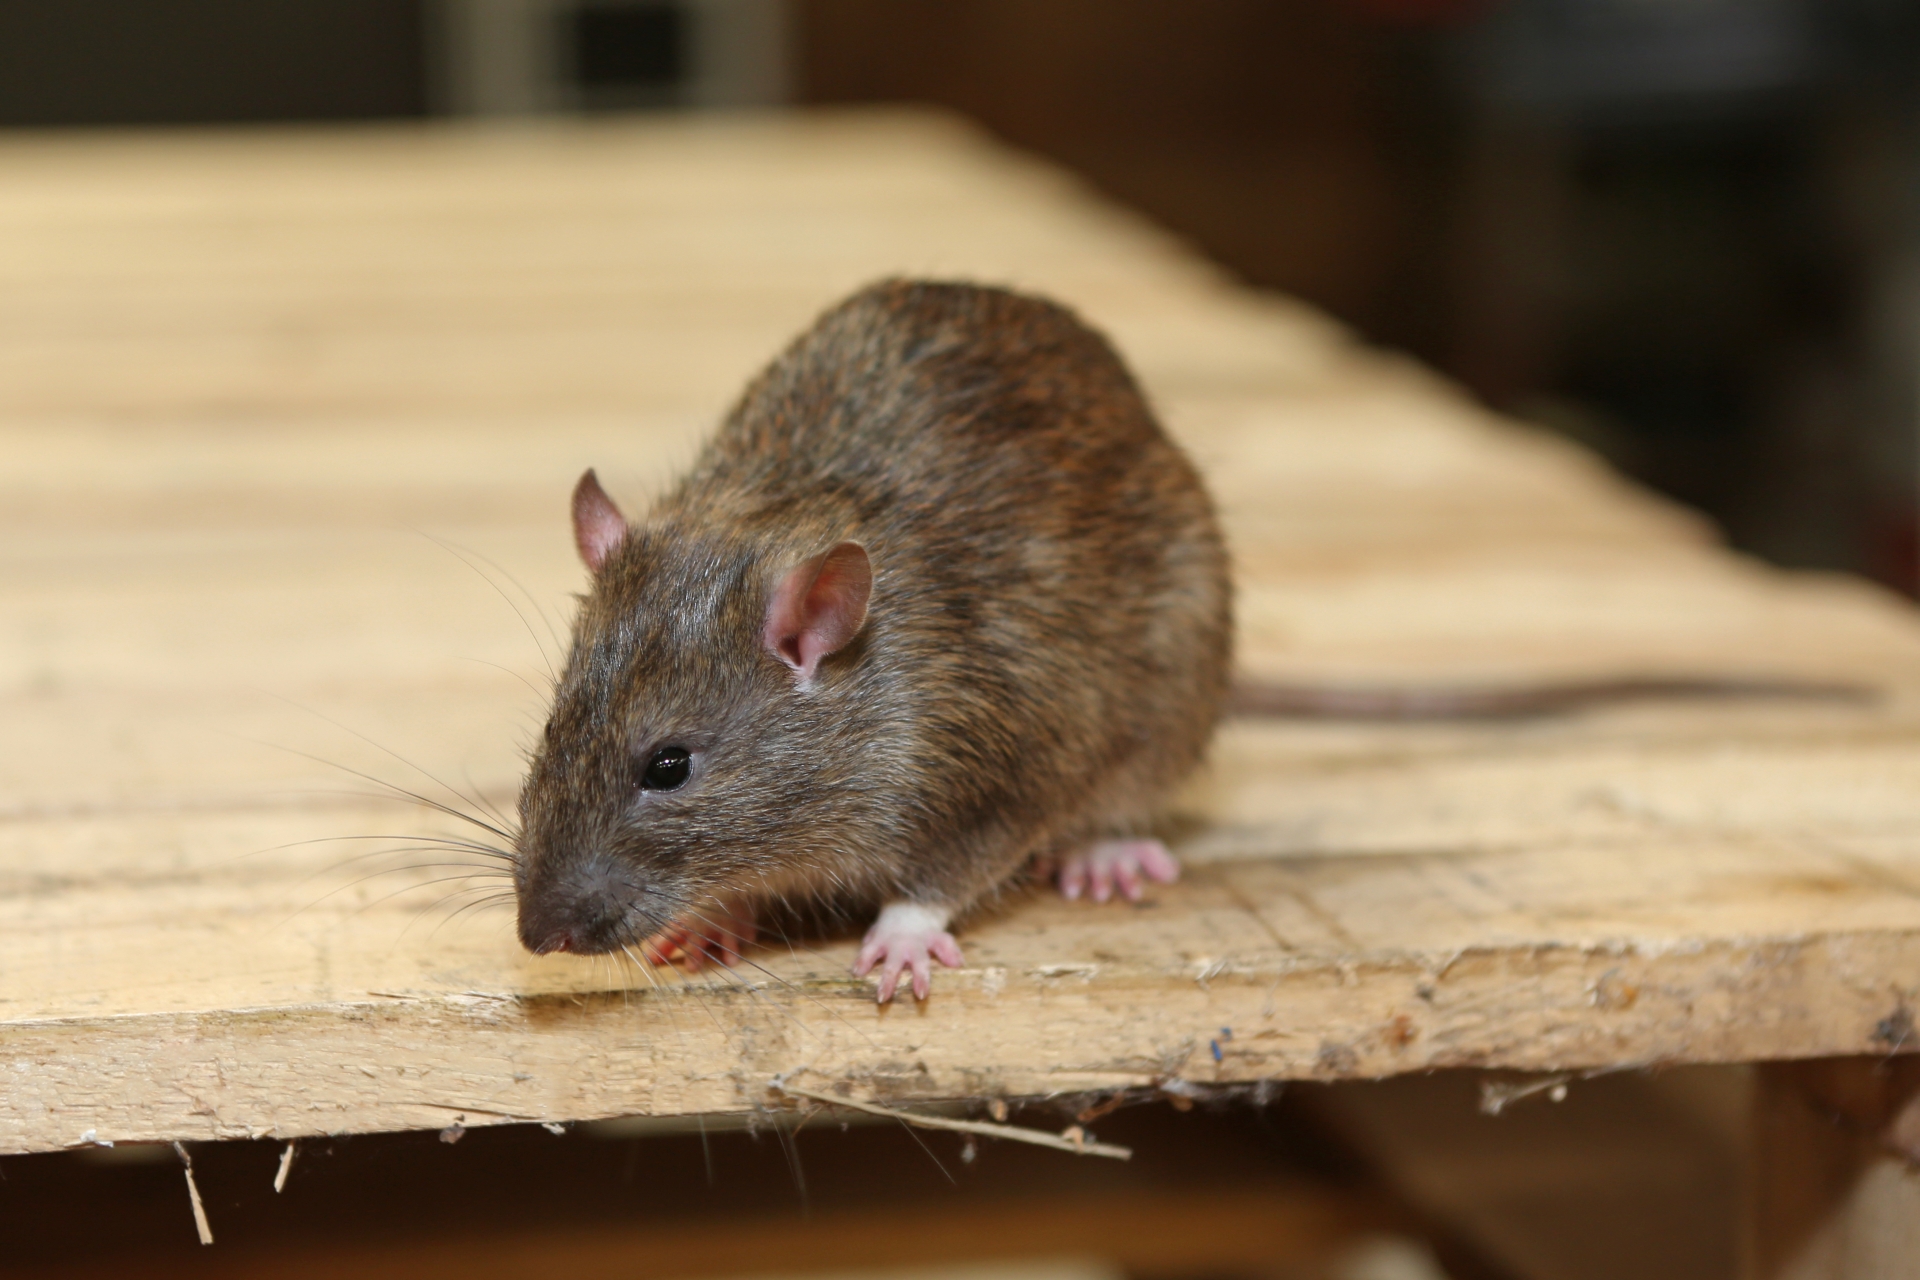 Rat extermination, Pest Control in Mortlake, SW14. Call Now 020 8166 9746